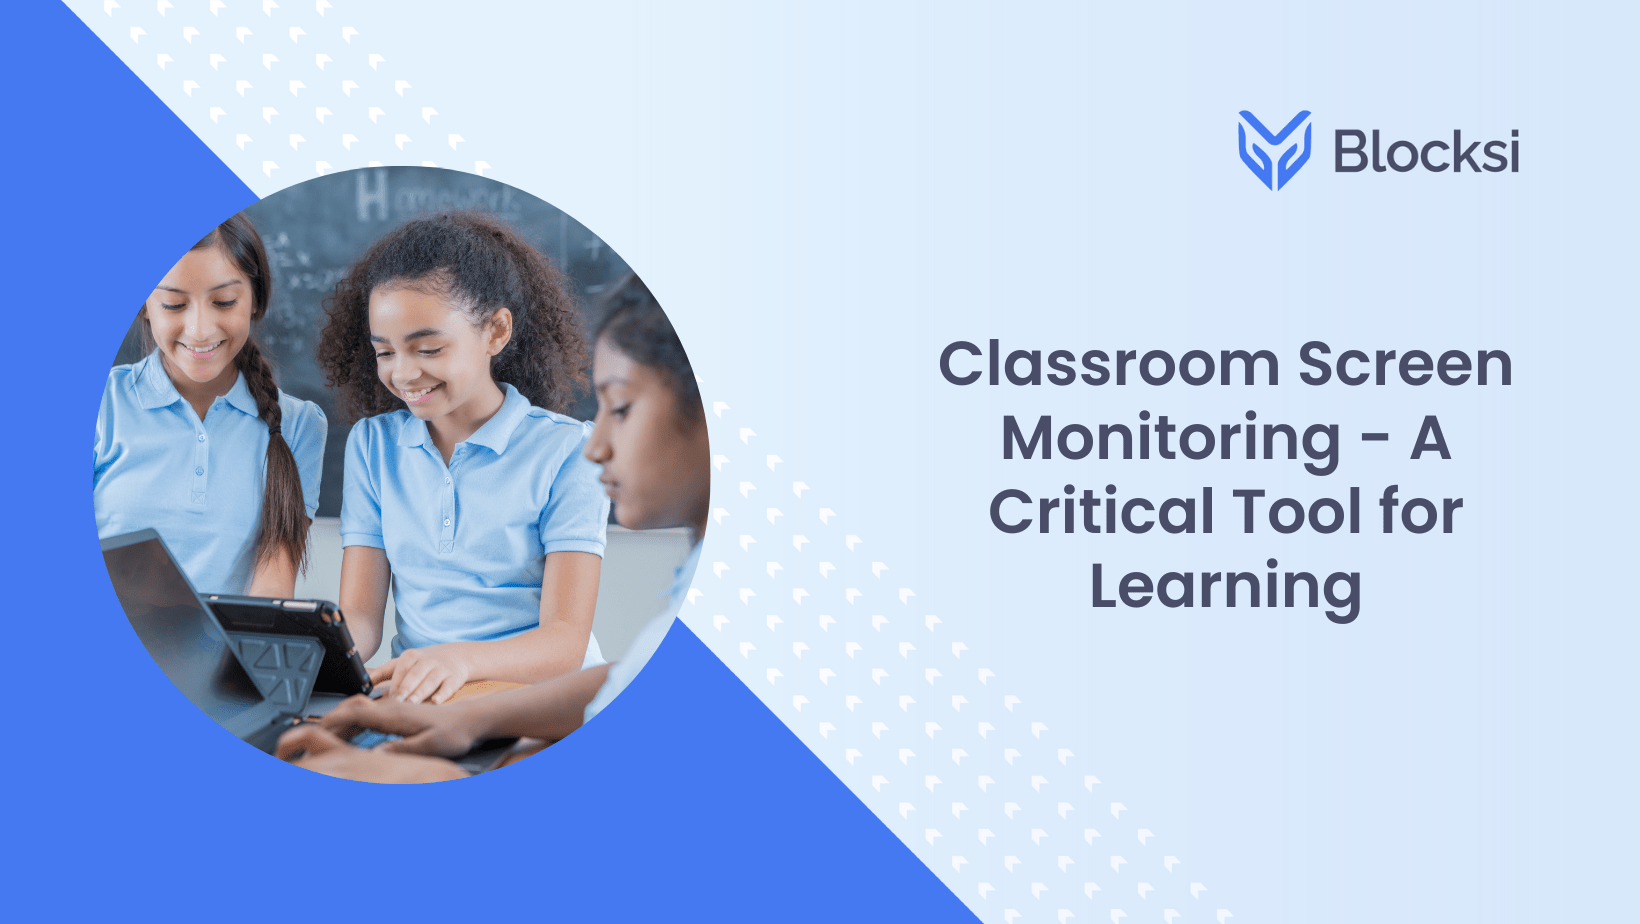 Classroom Screen Monitoring - A Critical Tool for Learning